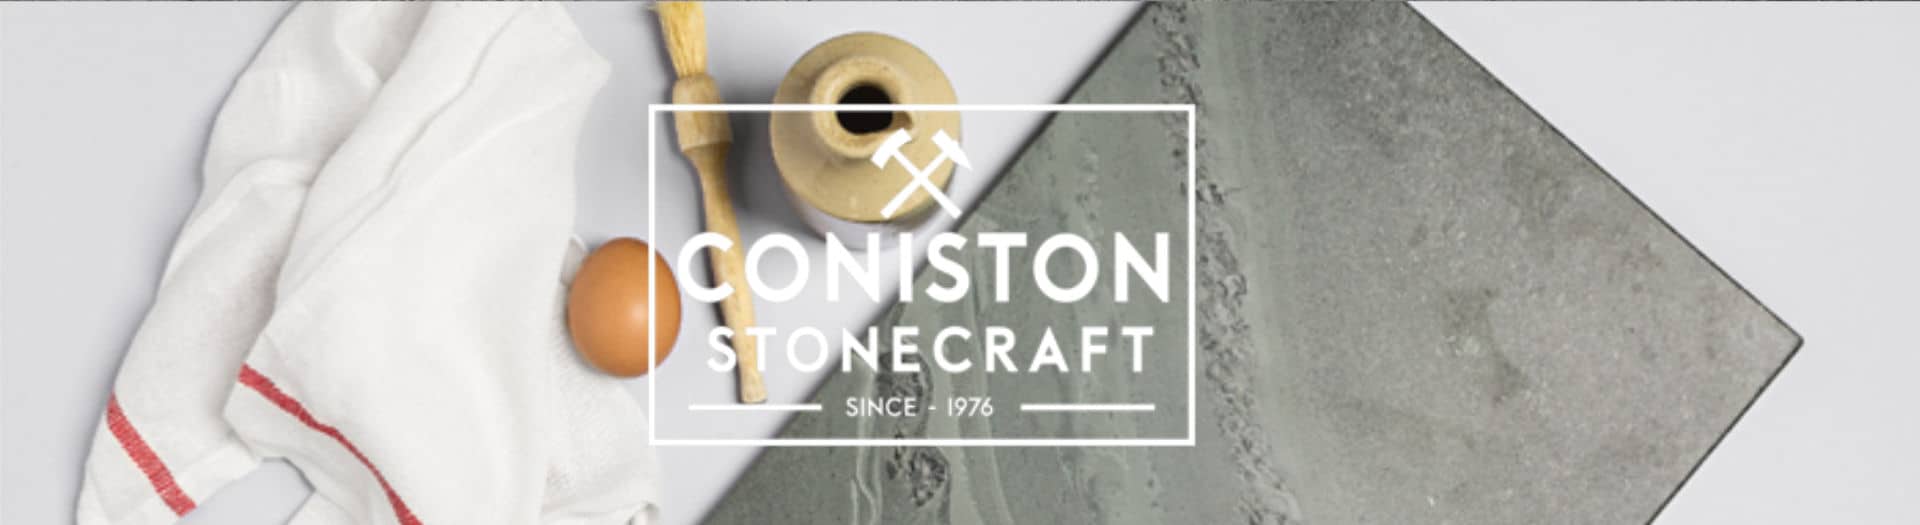 coniston stonecraft header with white log slate mat with egg